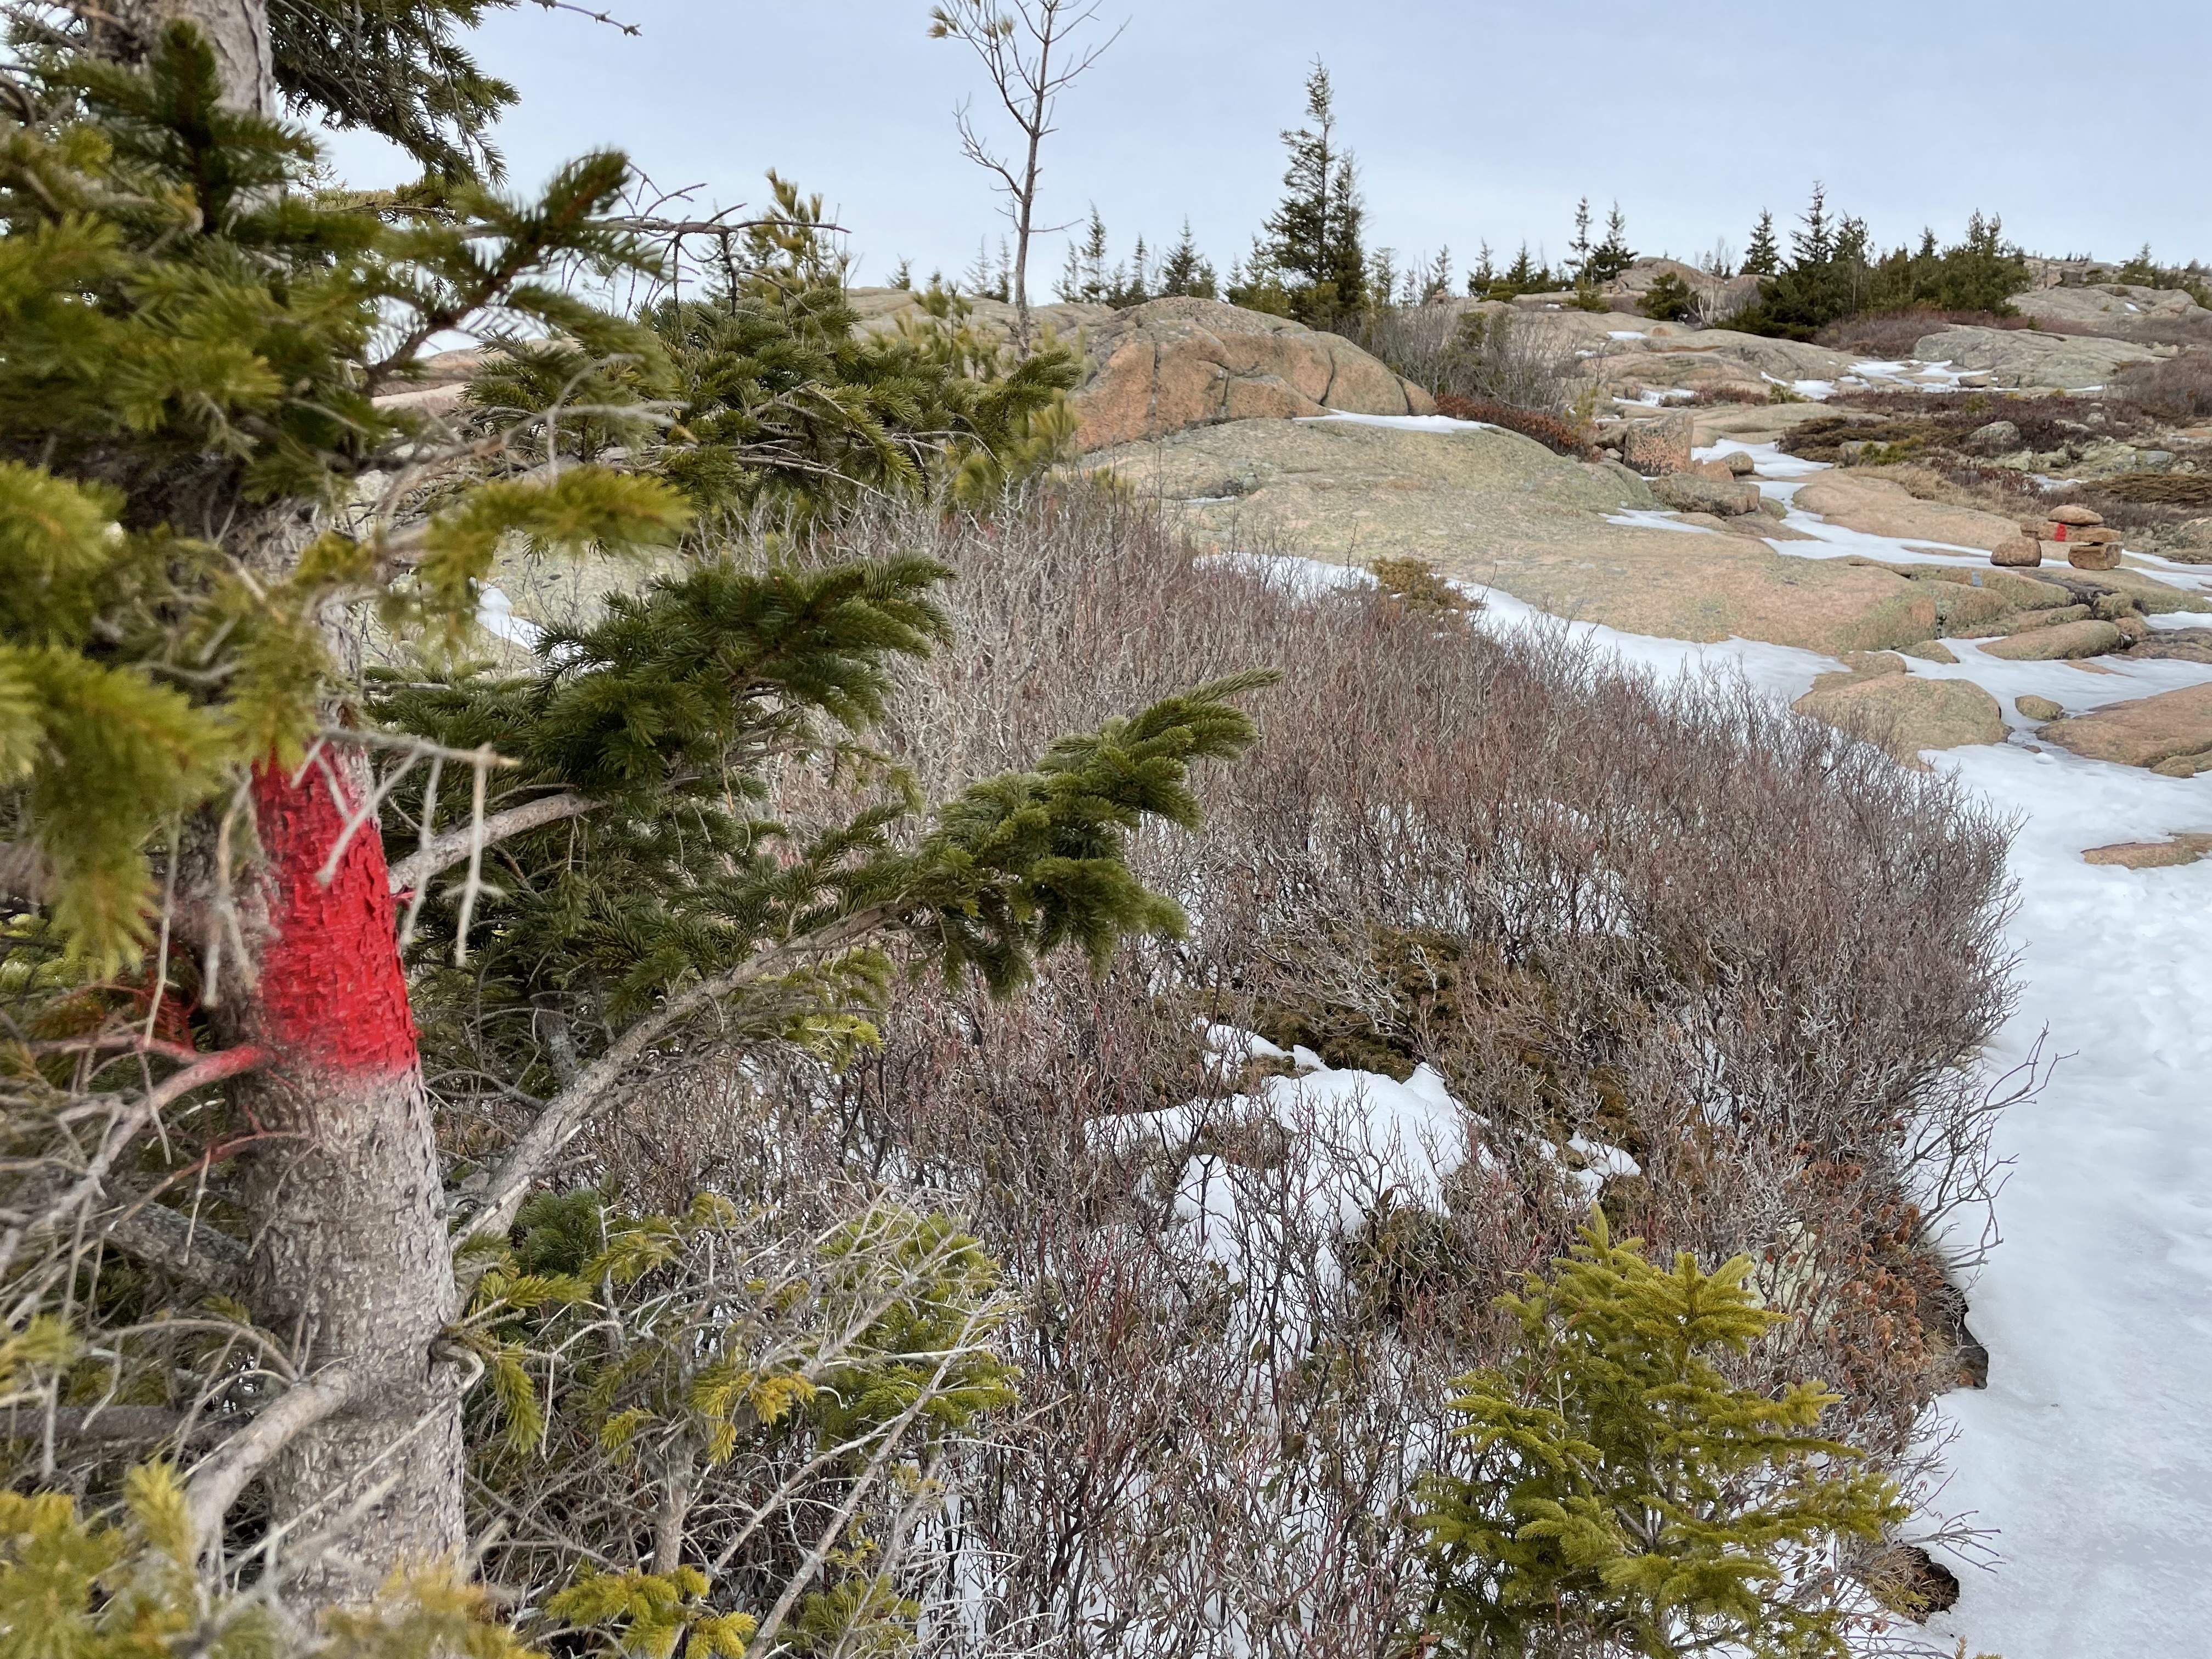 a tree splashed with red paint surrounded by rocks and vegetation on a winter mountain summit